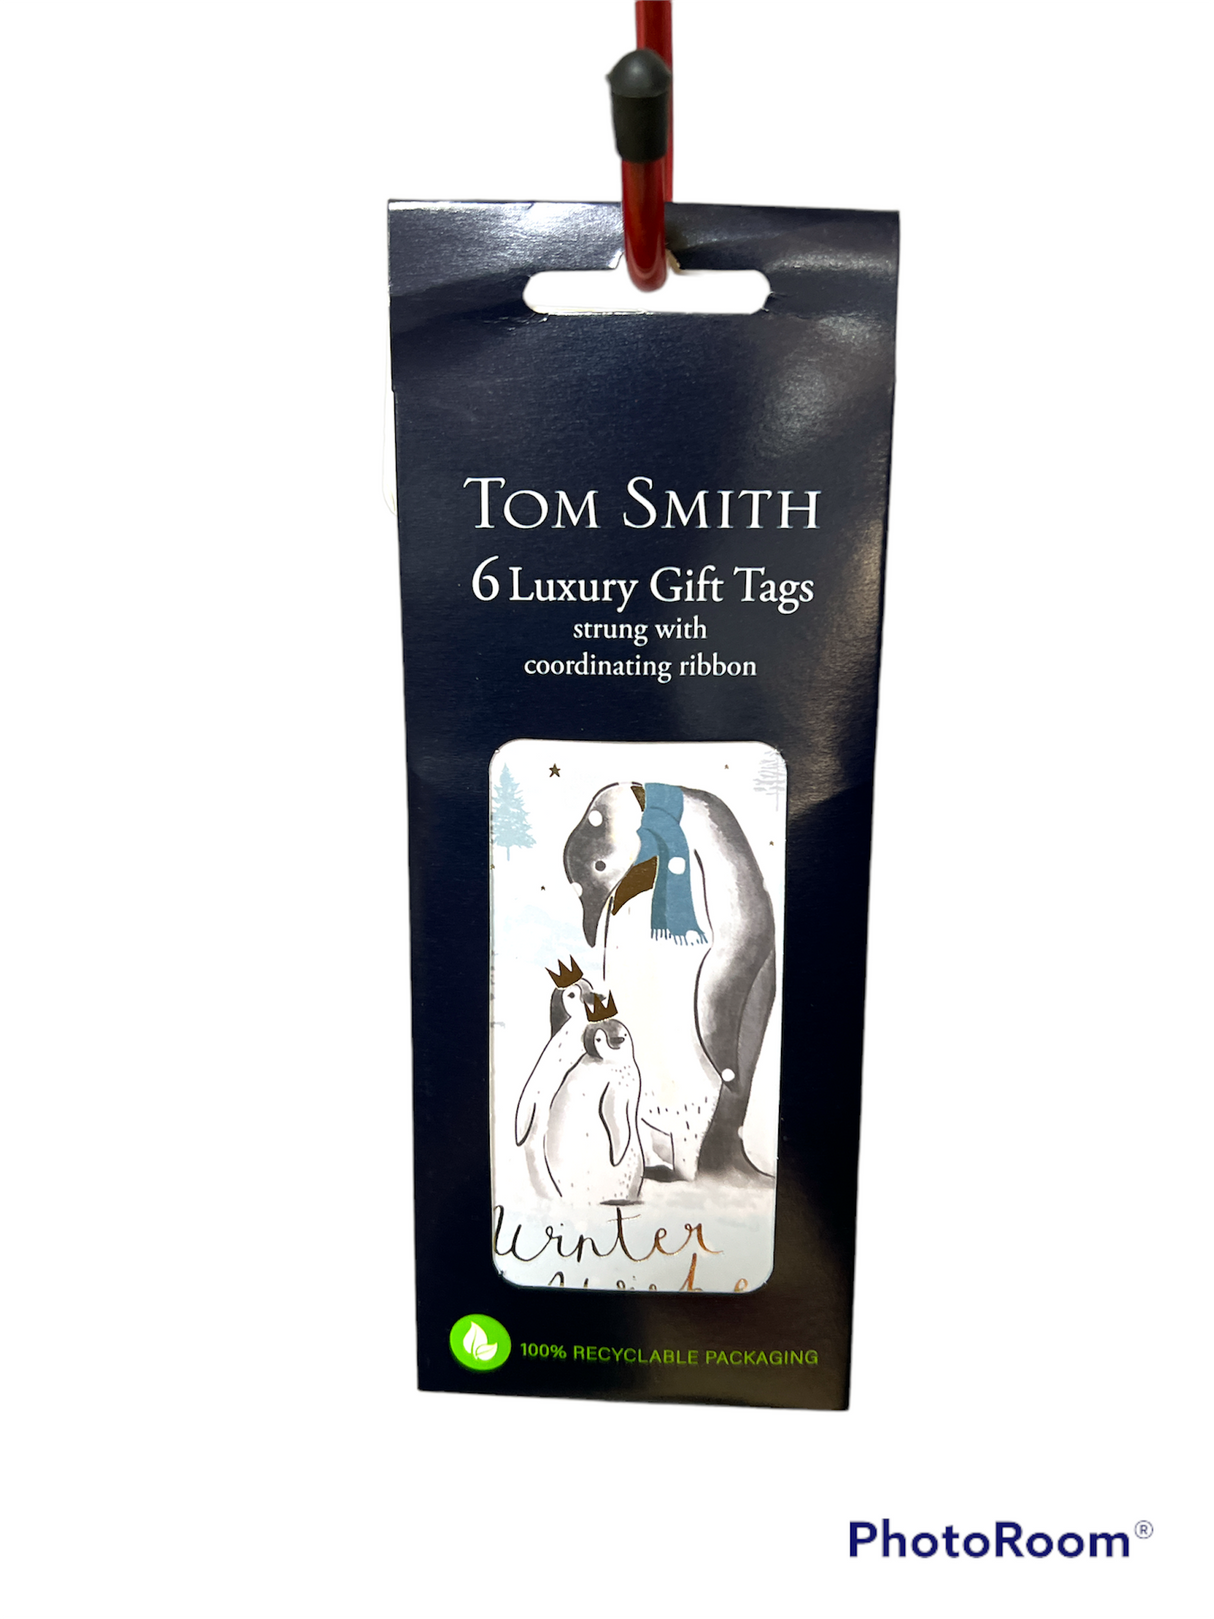 6 Tom Smith Luxury Gift Tags